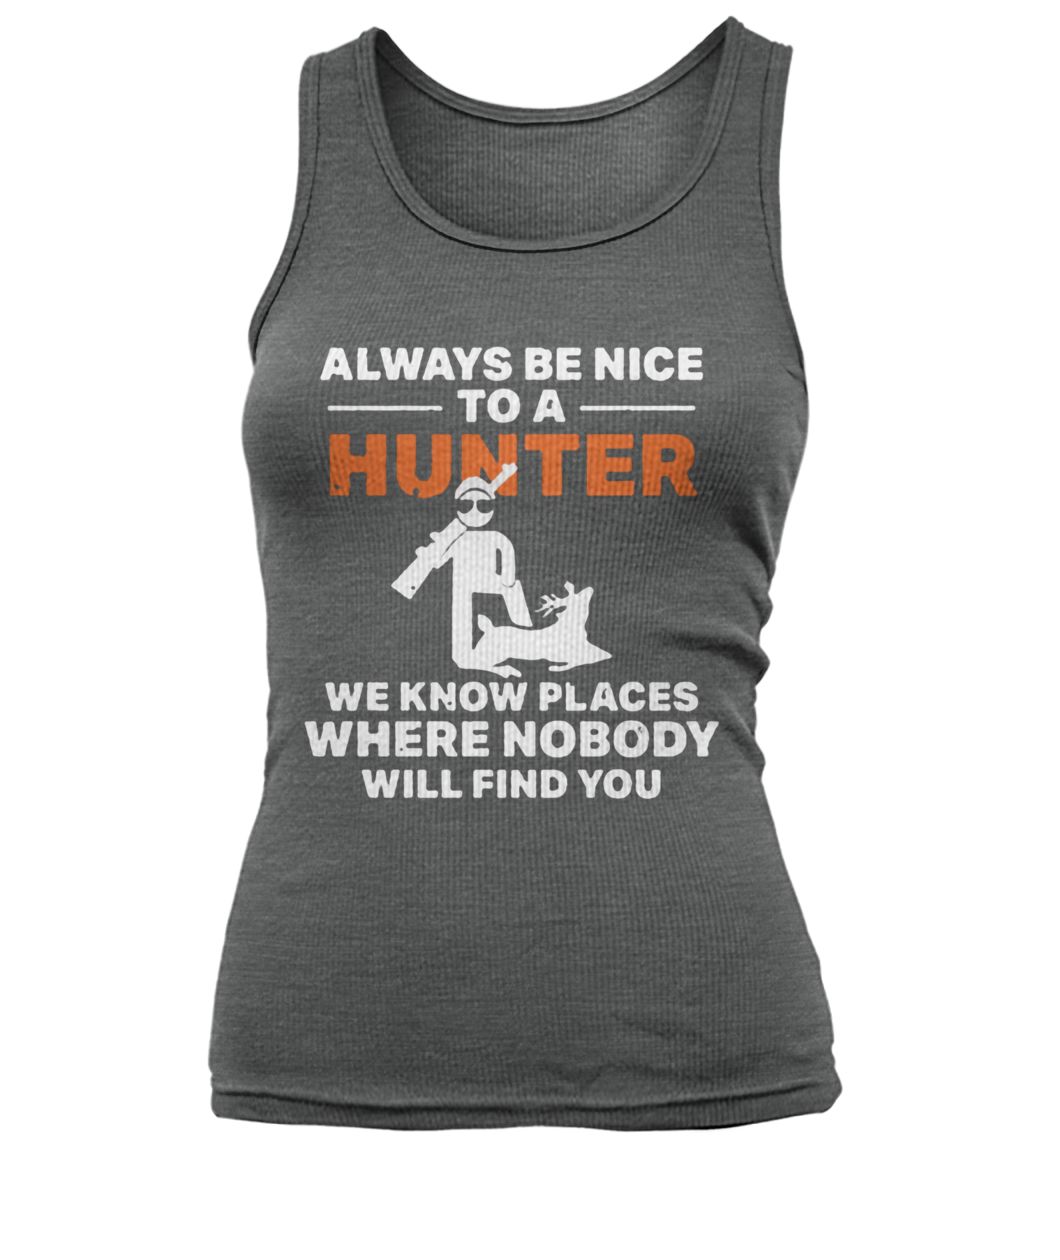 Always be nice to a hunter we know places where nobody will find you women's tank top